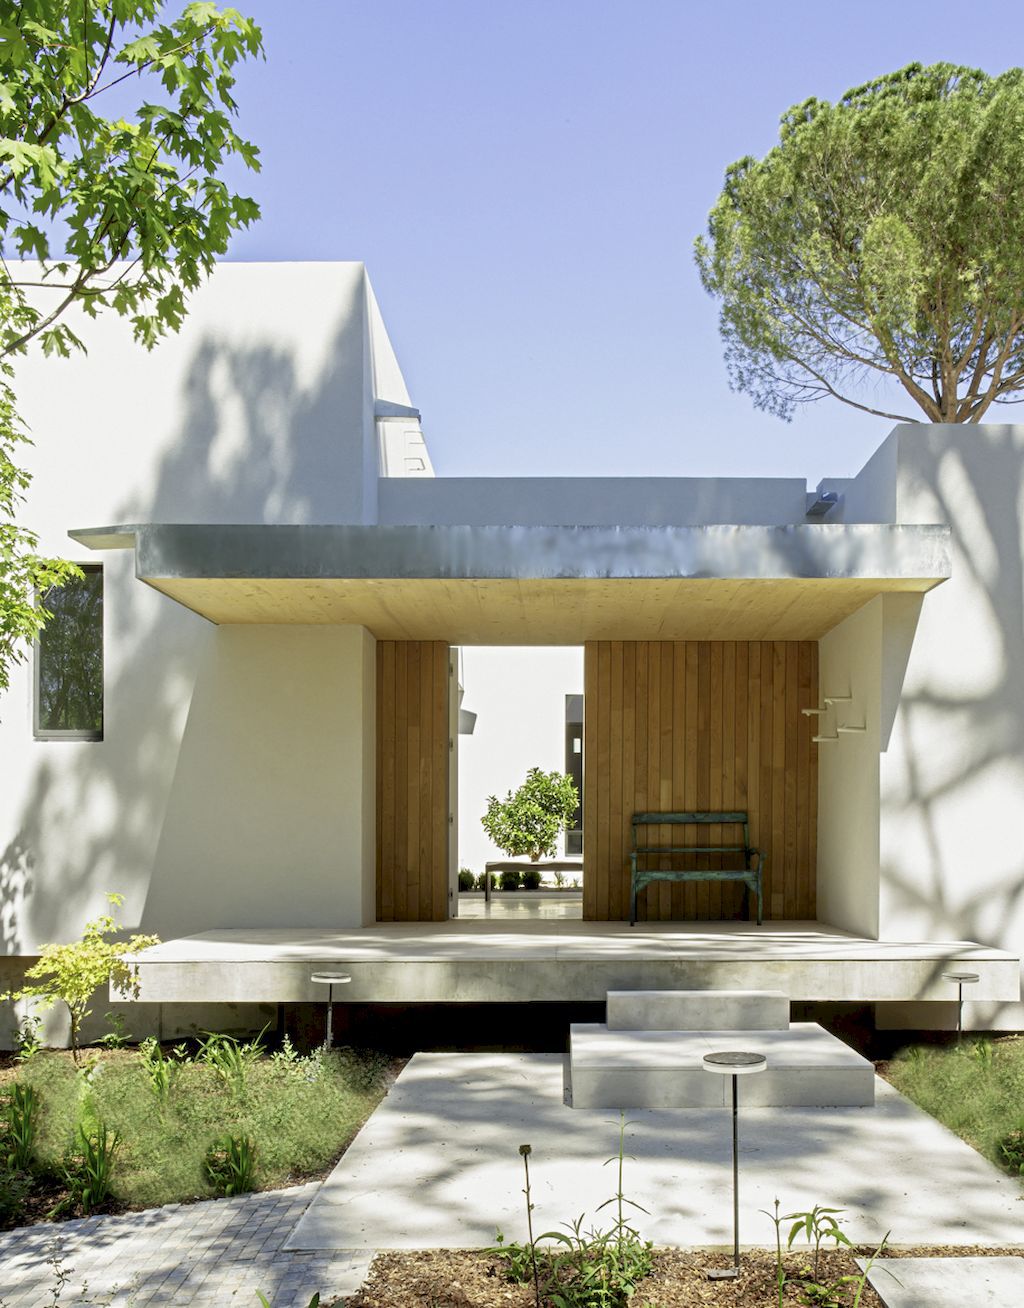 House AS, an Elegant House With Outdoor Living Connection by Ábaton